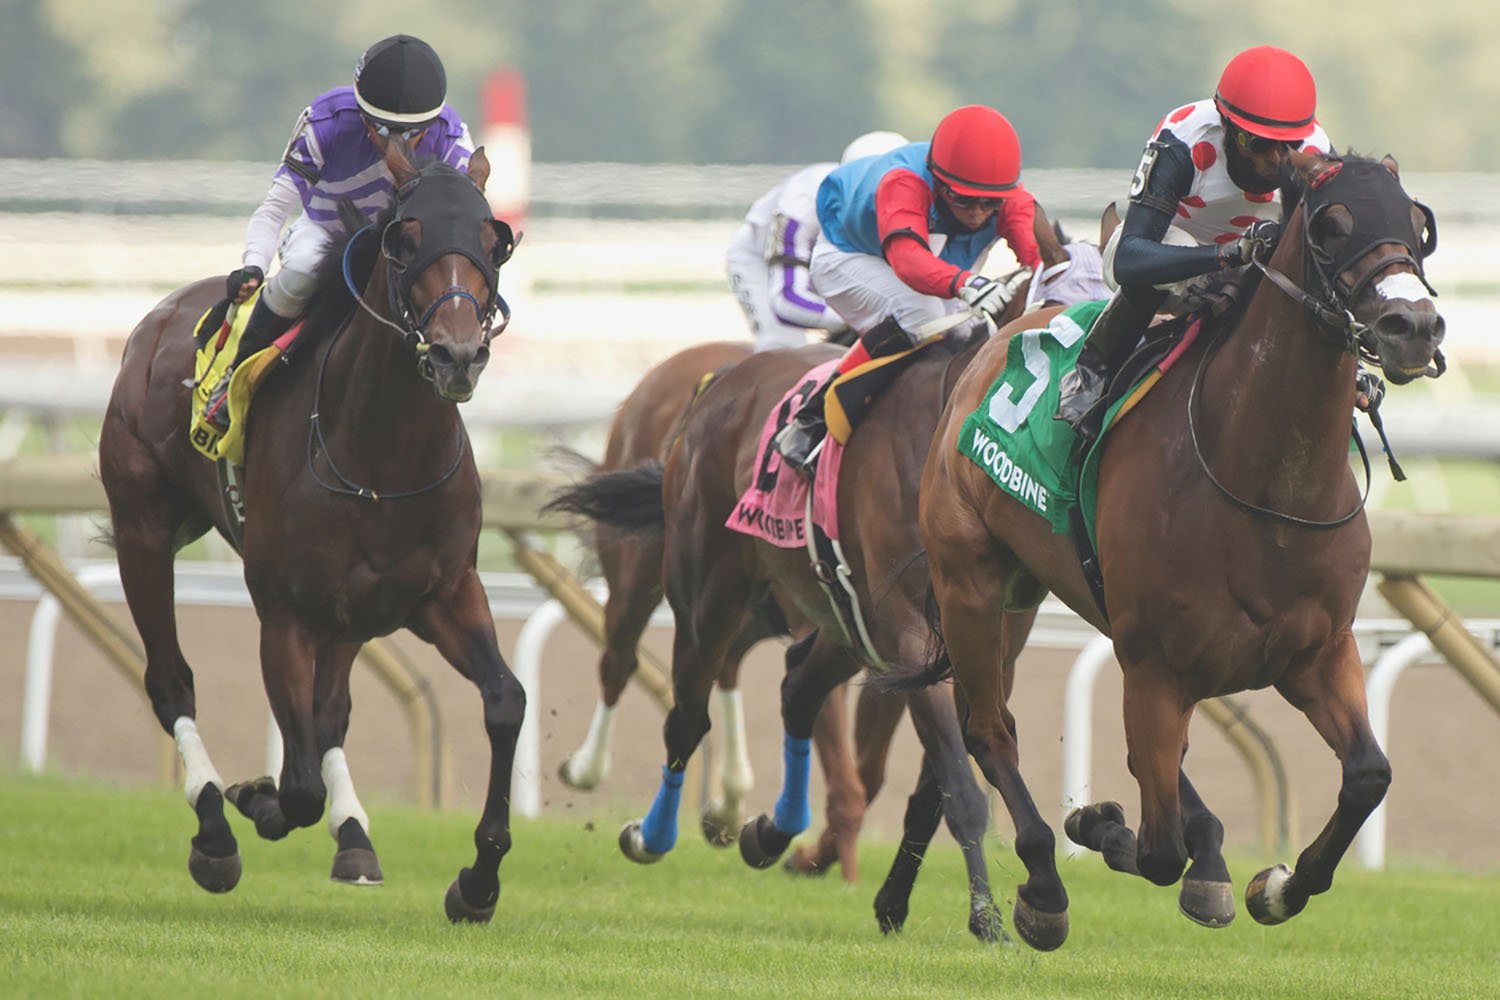 March to the Arch and jockey Patrick Husbands winning the $100,000 Niagara Stakes on Sunday, July 25 at Woodbine Racetrack. (Michael Burns Photo)